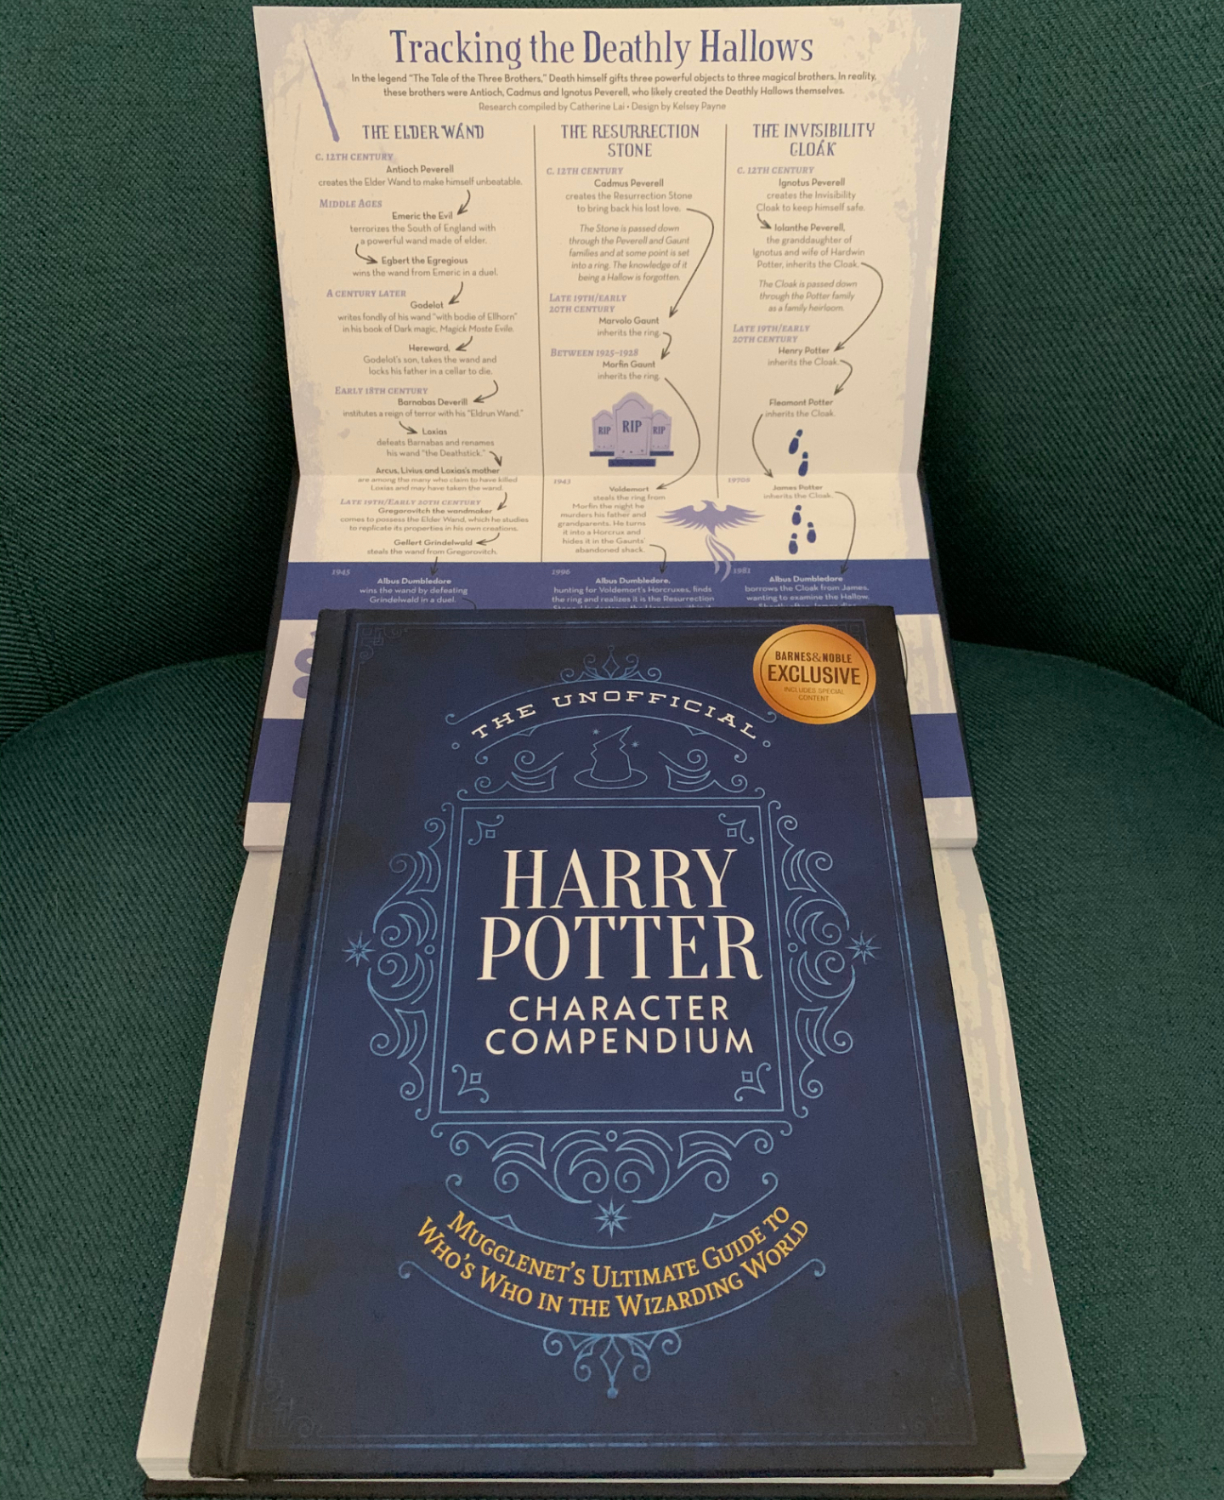 "The Unofficial Harry Potter Character Compendium" open to the "Tracking the Deathly Hallows" feature